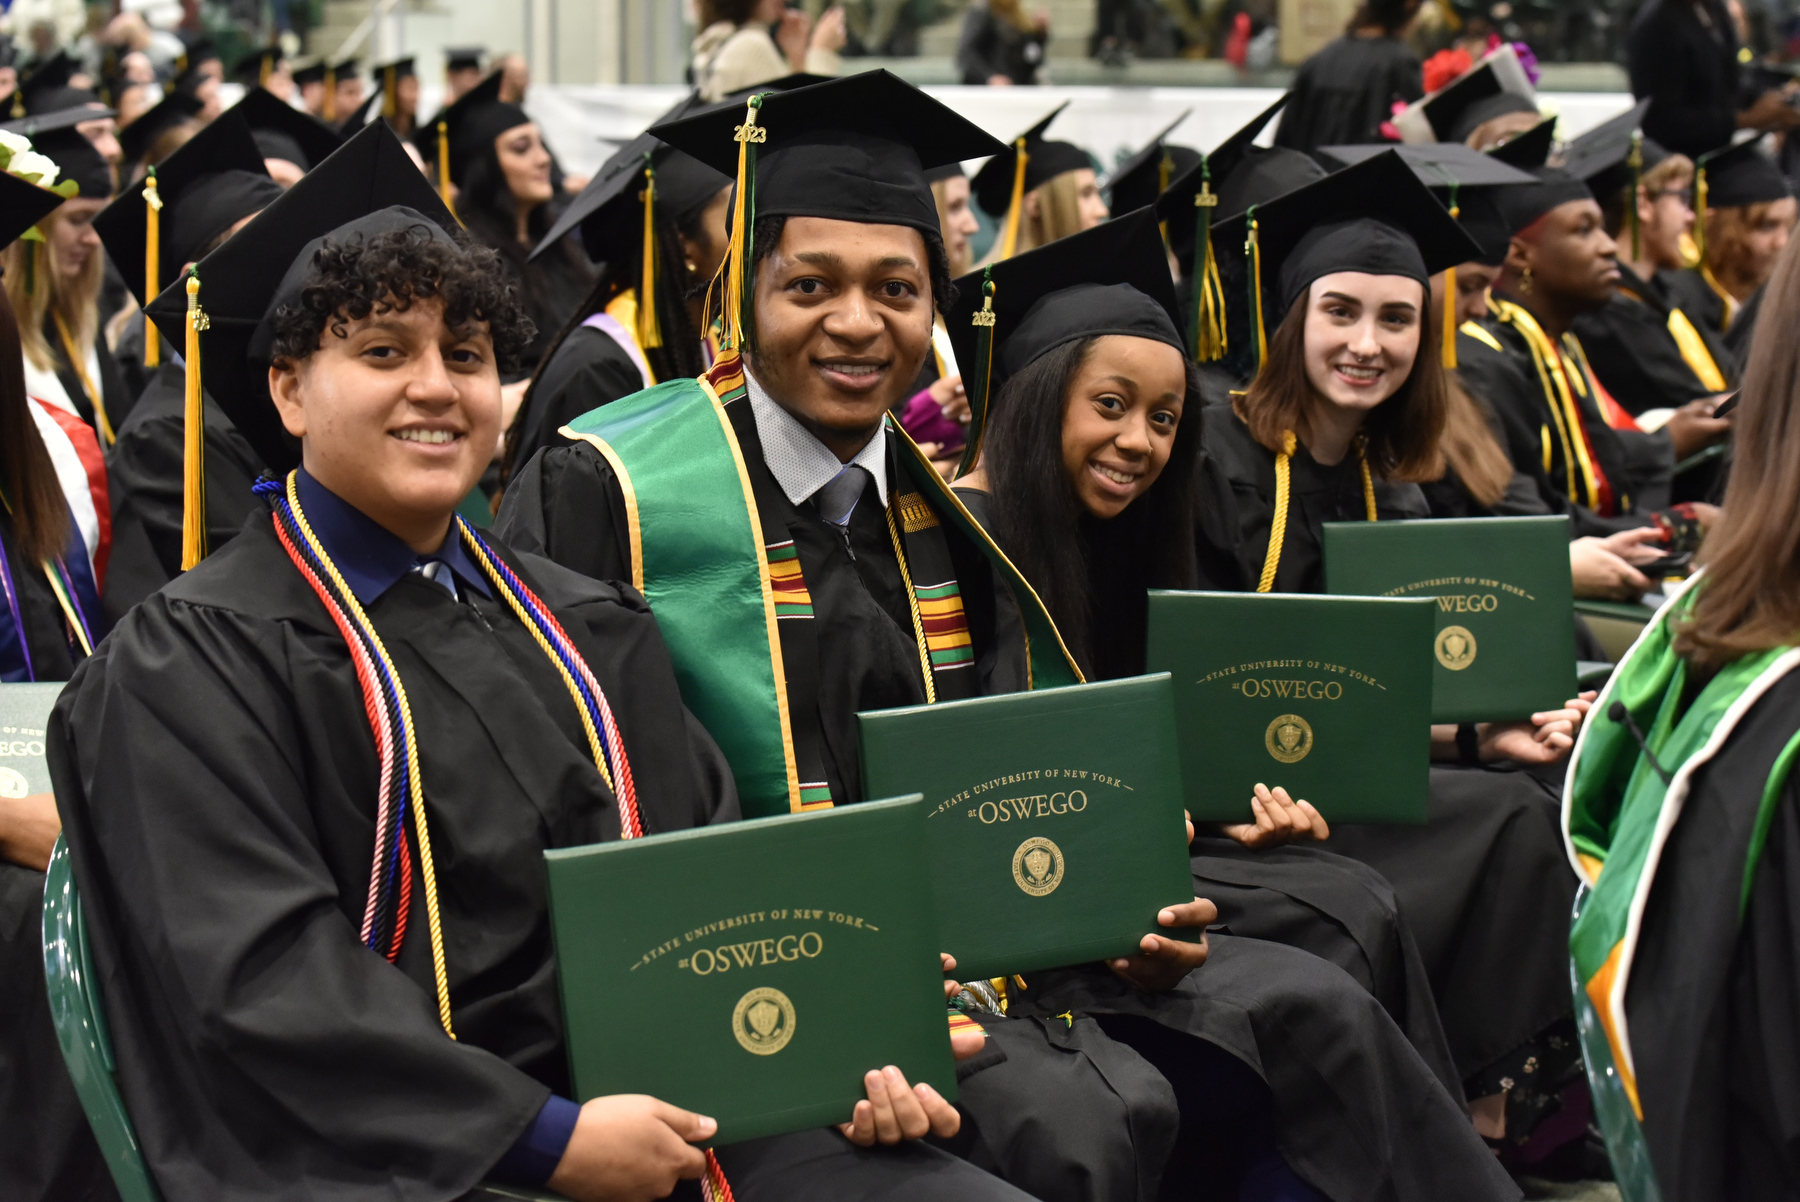 Graduates proudly display their diploma covers at the December Commencement.